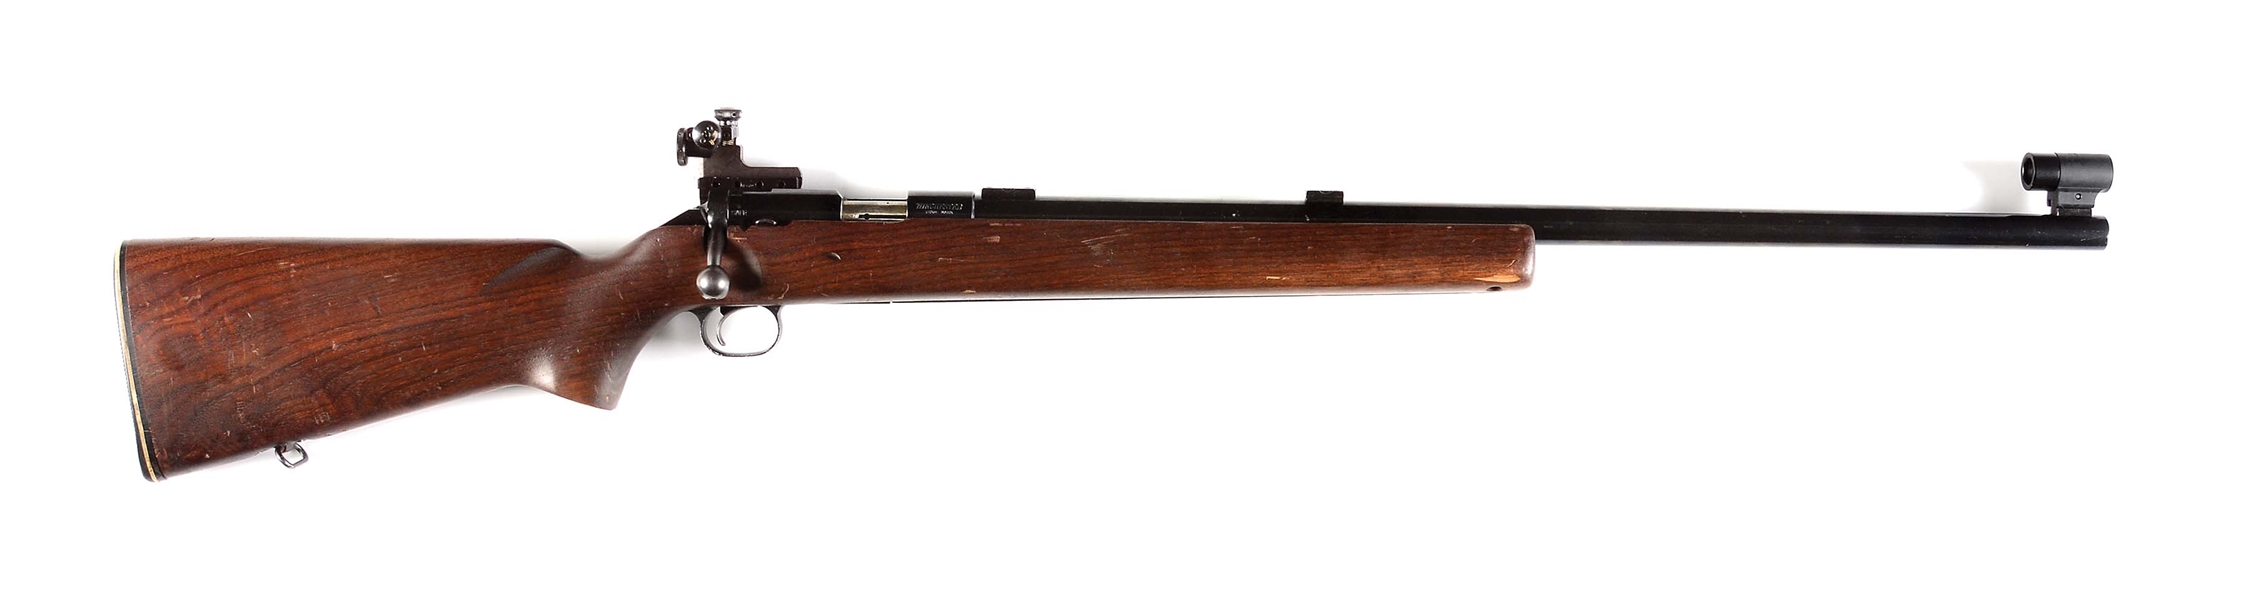 (C) UNITED STATES PROPERTY MARKED WINCHESTER MODEL 52 .22 LR BOLT ACTION TRAINER RIFLE.